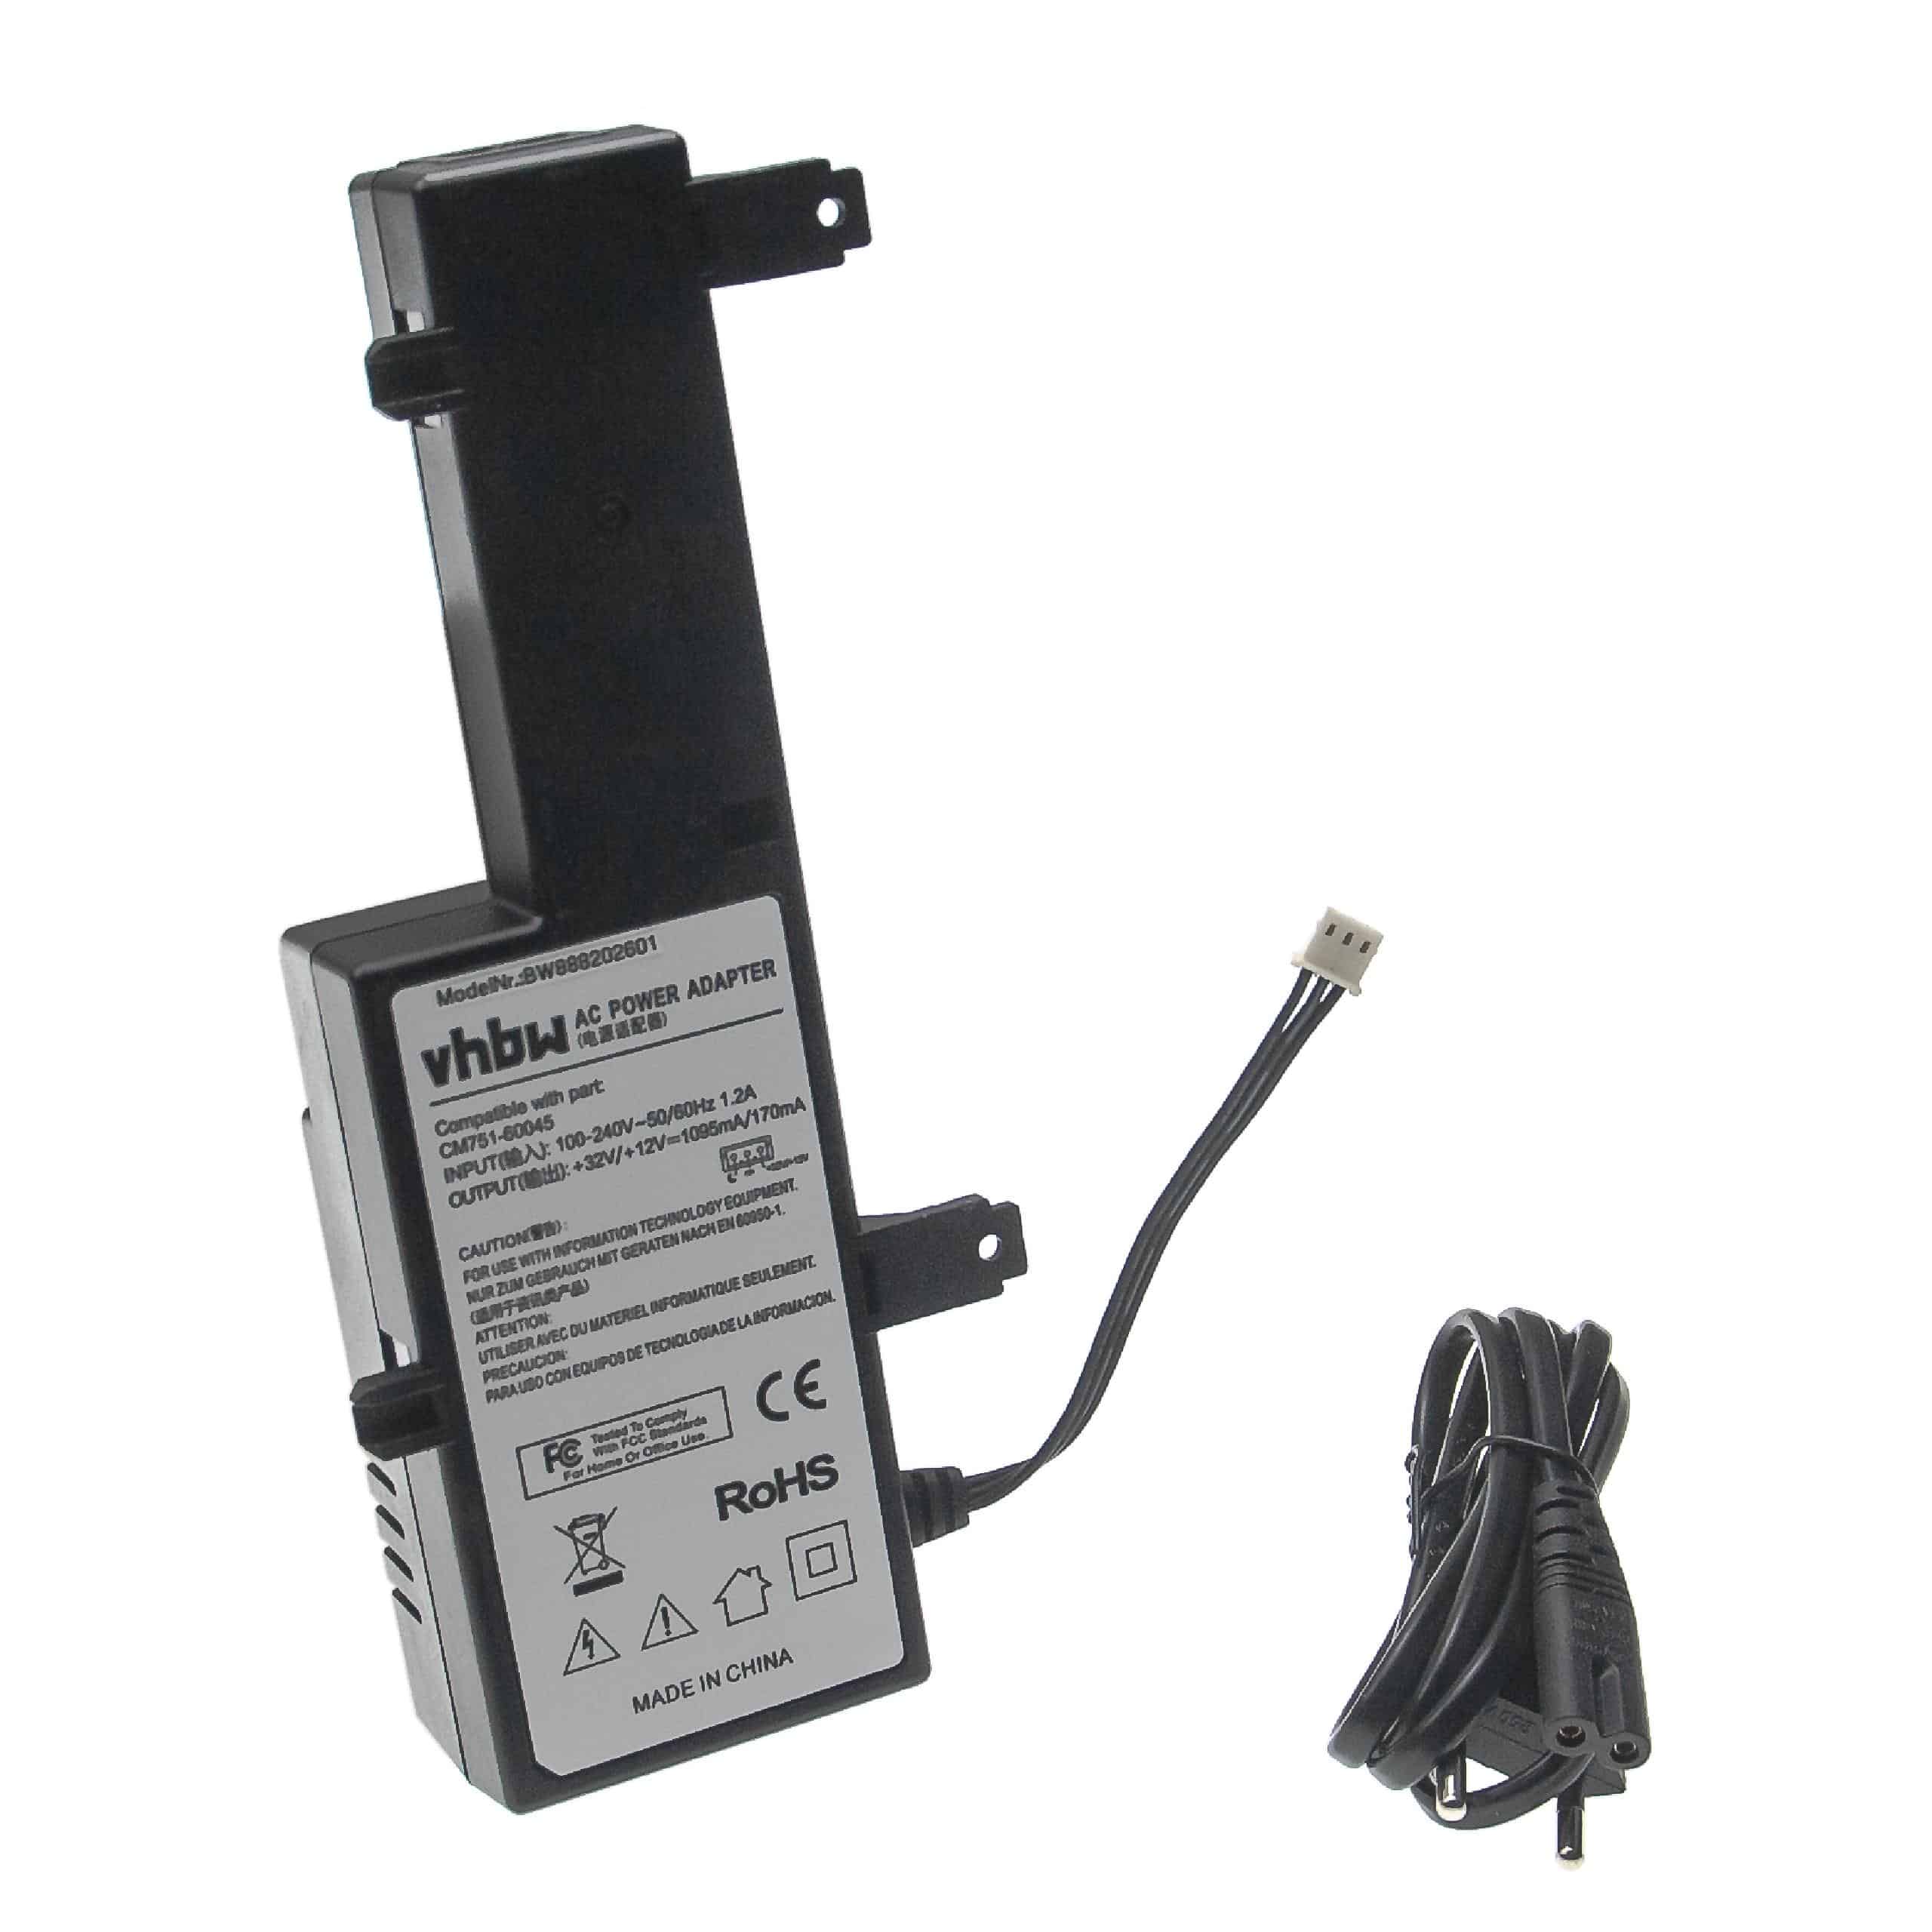 Mains Power Adapter replaces HP CM751-60045, CM751-60046, CM751-60190 for Printer